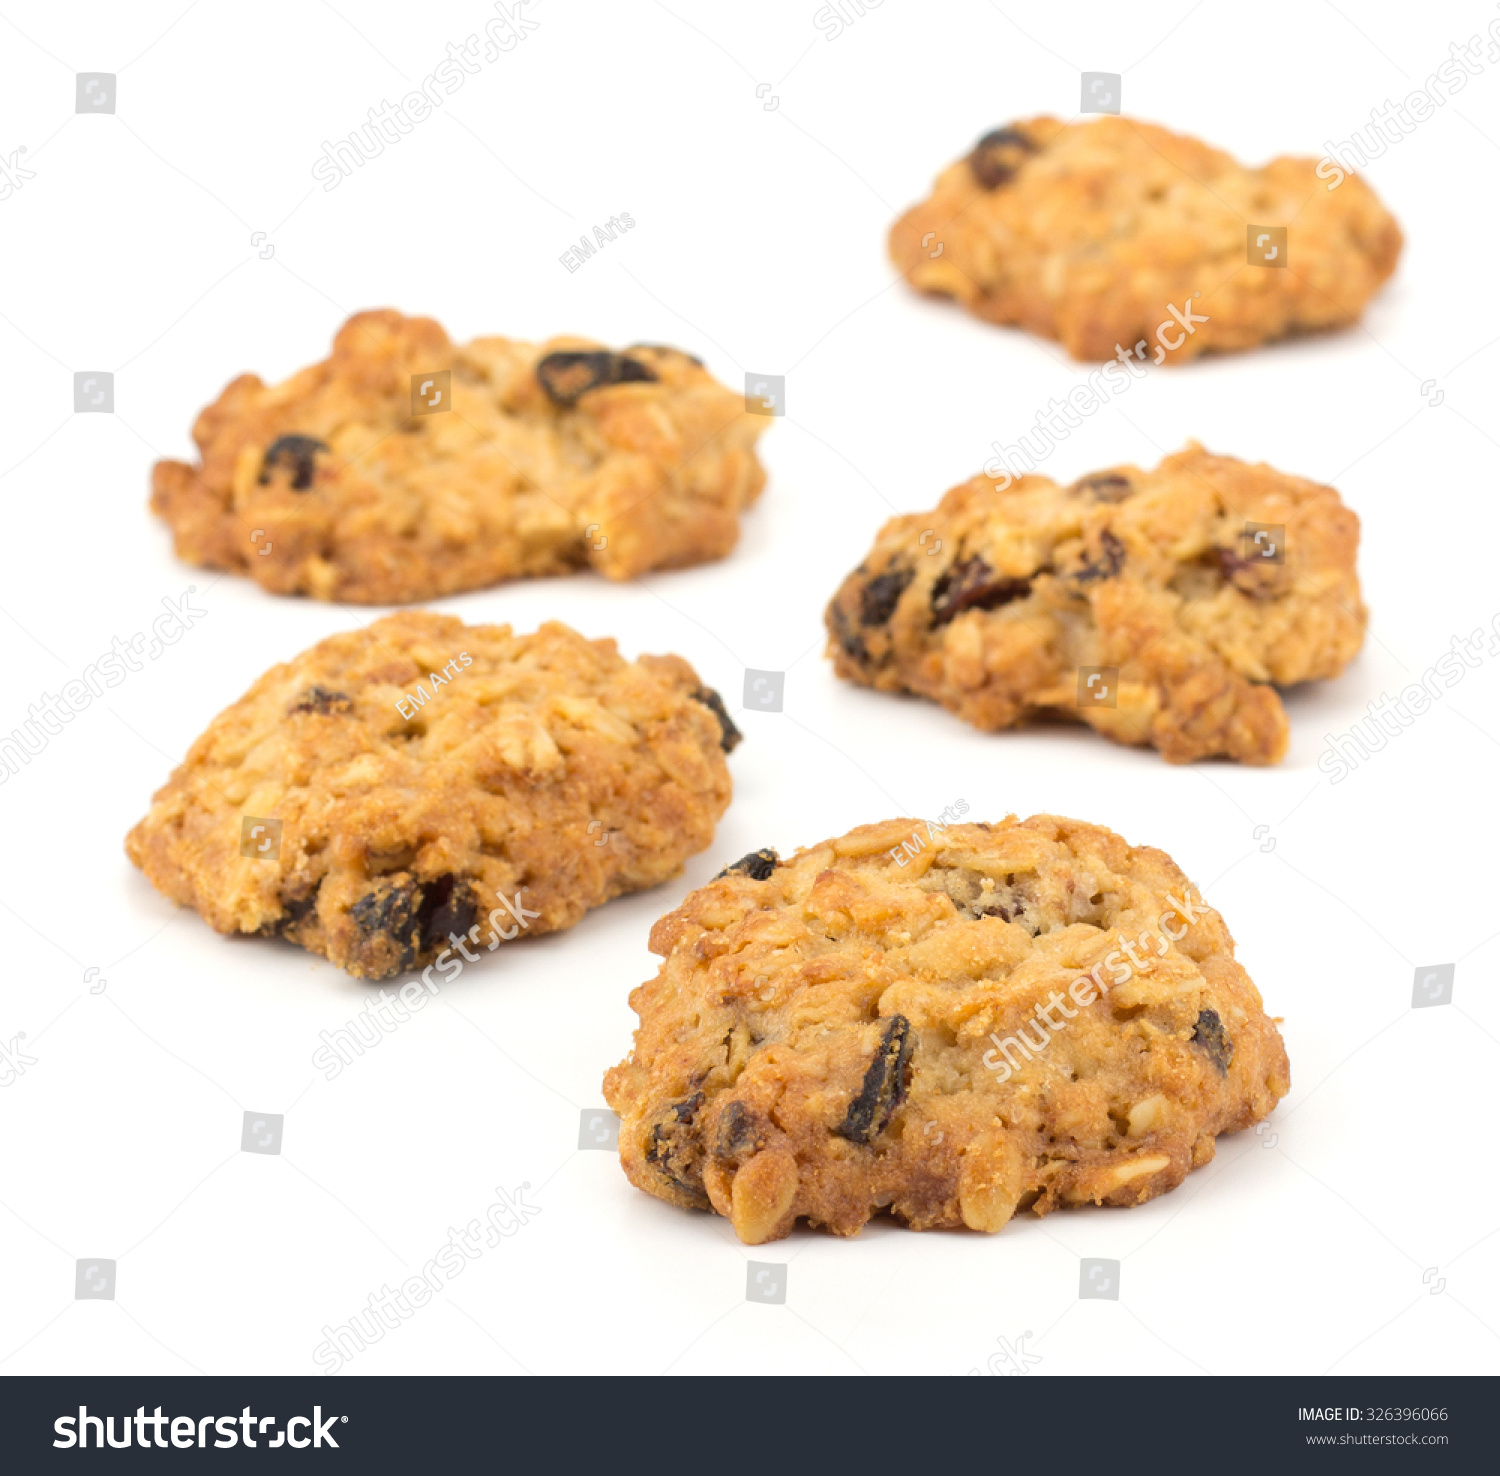 Fresh home made cookies with rasins isolated on white background #326396066